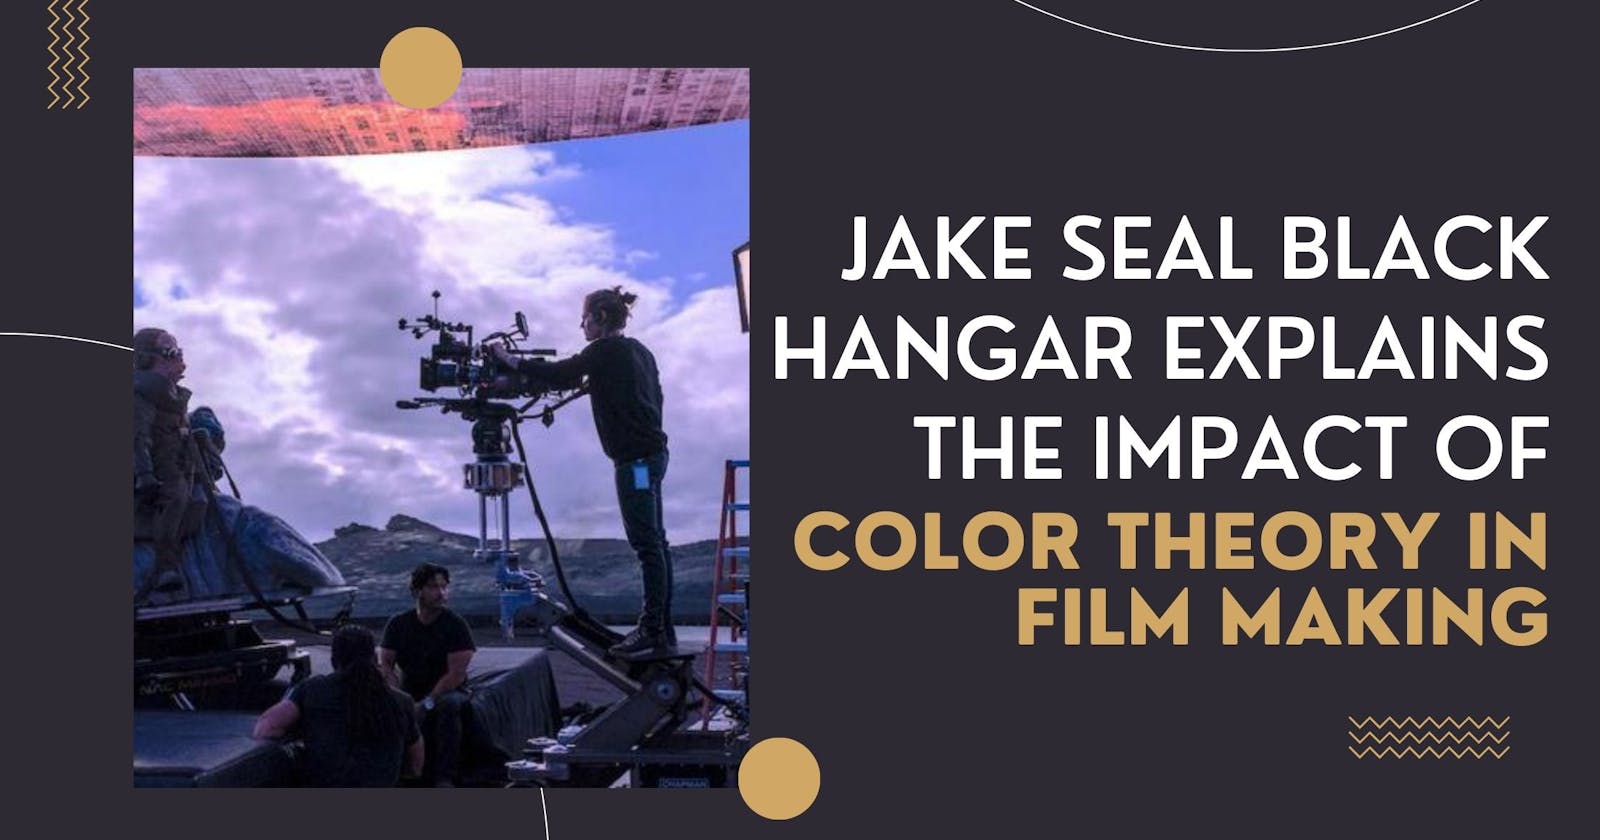 Jake Seal Black Hangar Explains The Impact of Color Theory in Film Making